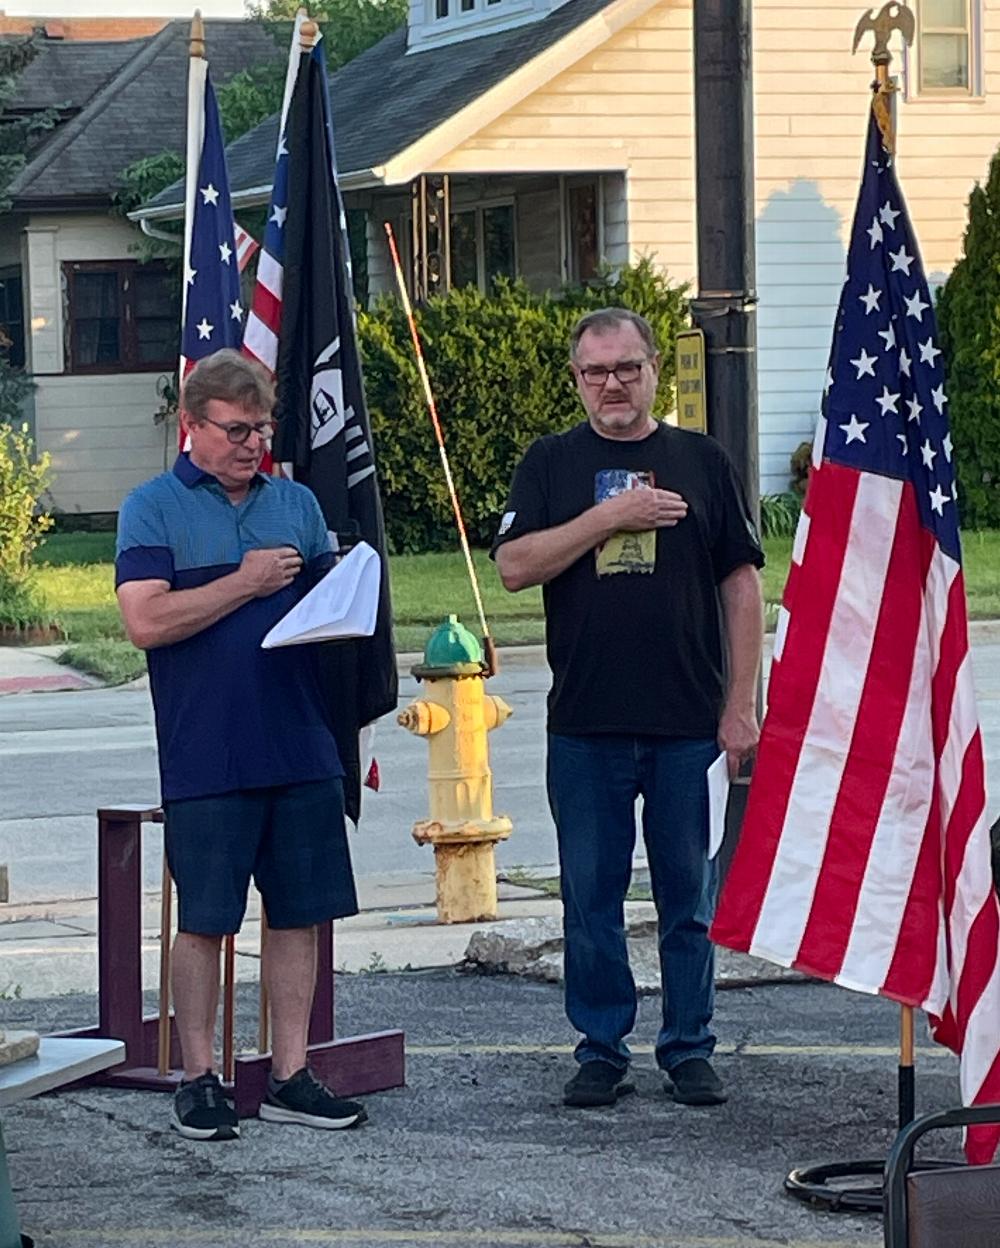 Flag Ceremony June 2021 with Tony Zeman and Bob Rolewicz.